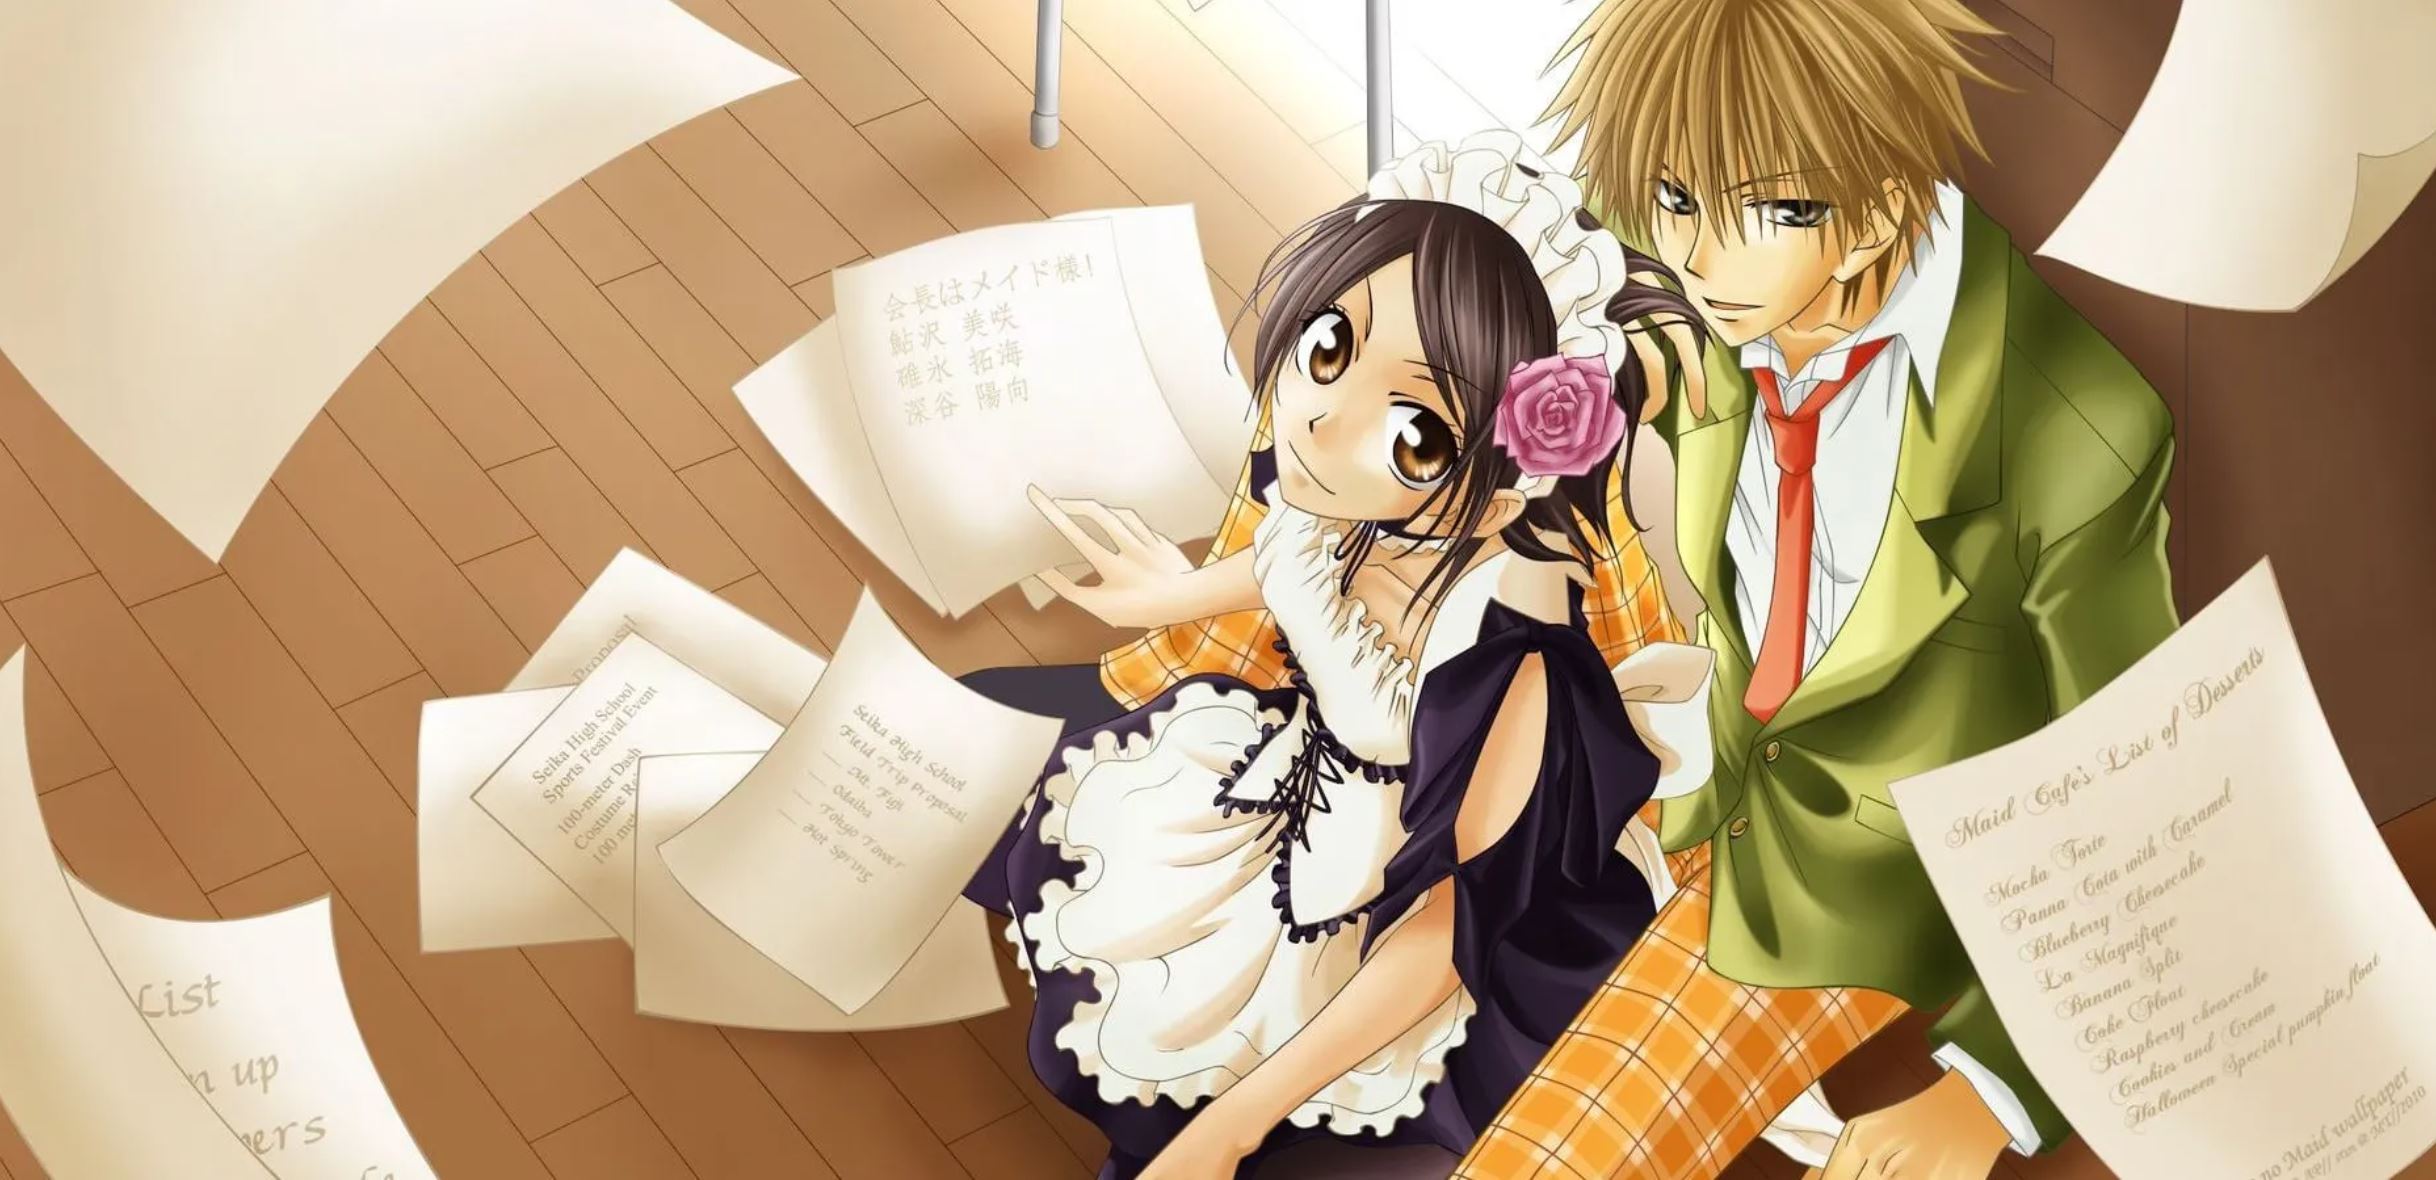 Where To Watch Maid Sama Online For Free [5 Easy Steps]